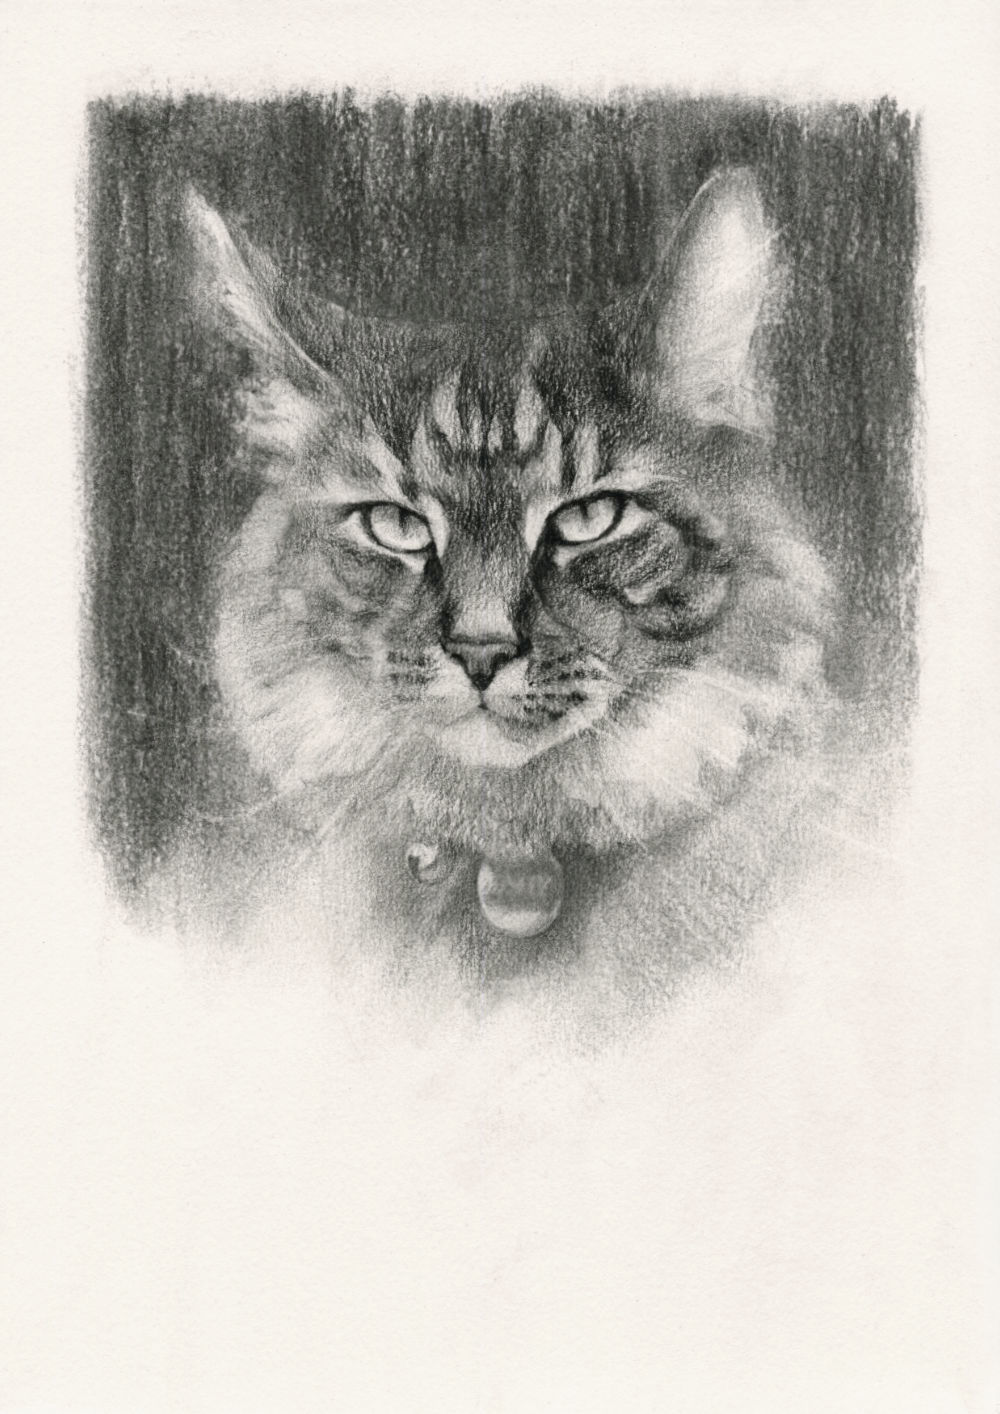 Cat Drawing in Charcoal on Paper, by Artist & Illustrator James Martin